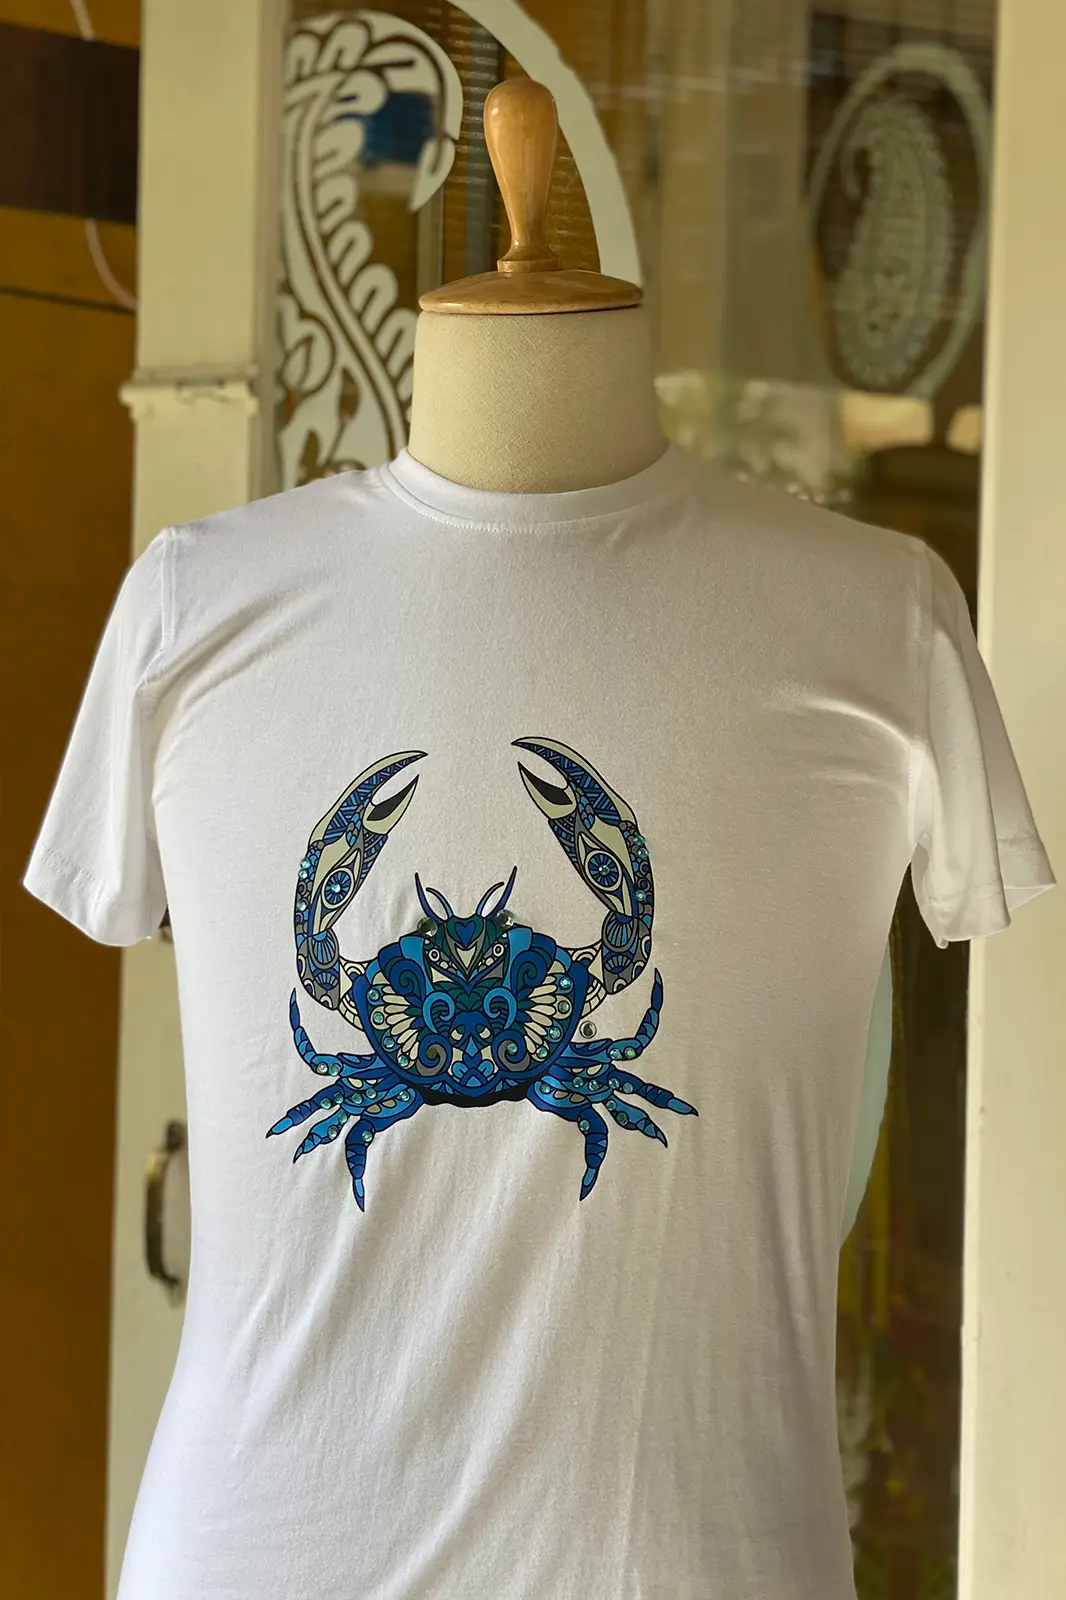 Joa Zod Can White, t shirt for man, t shirt for men, t shirt with design, white t shirt, Crab design, white t shirt male, zodiac sign tshirt, crab t shirt